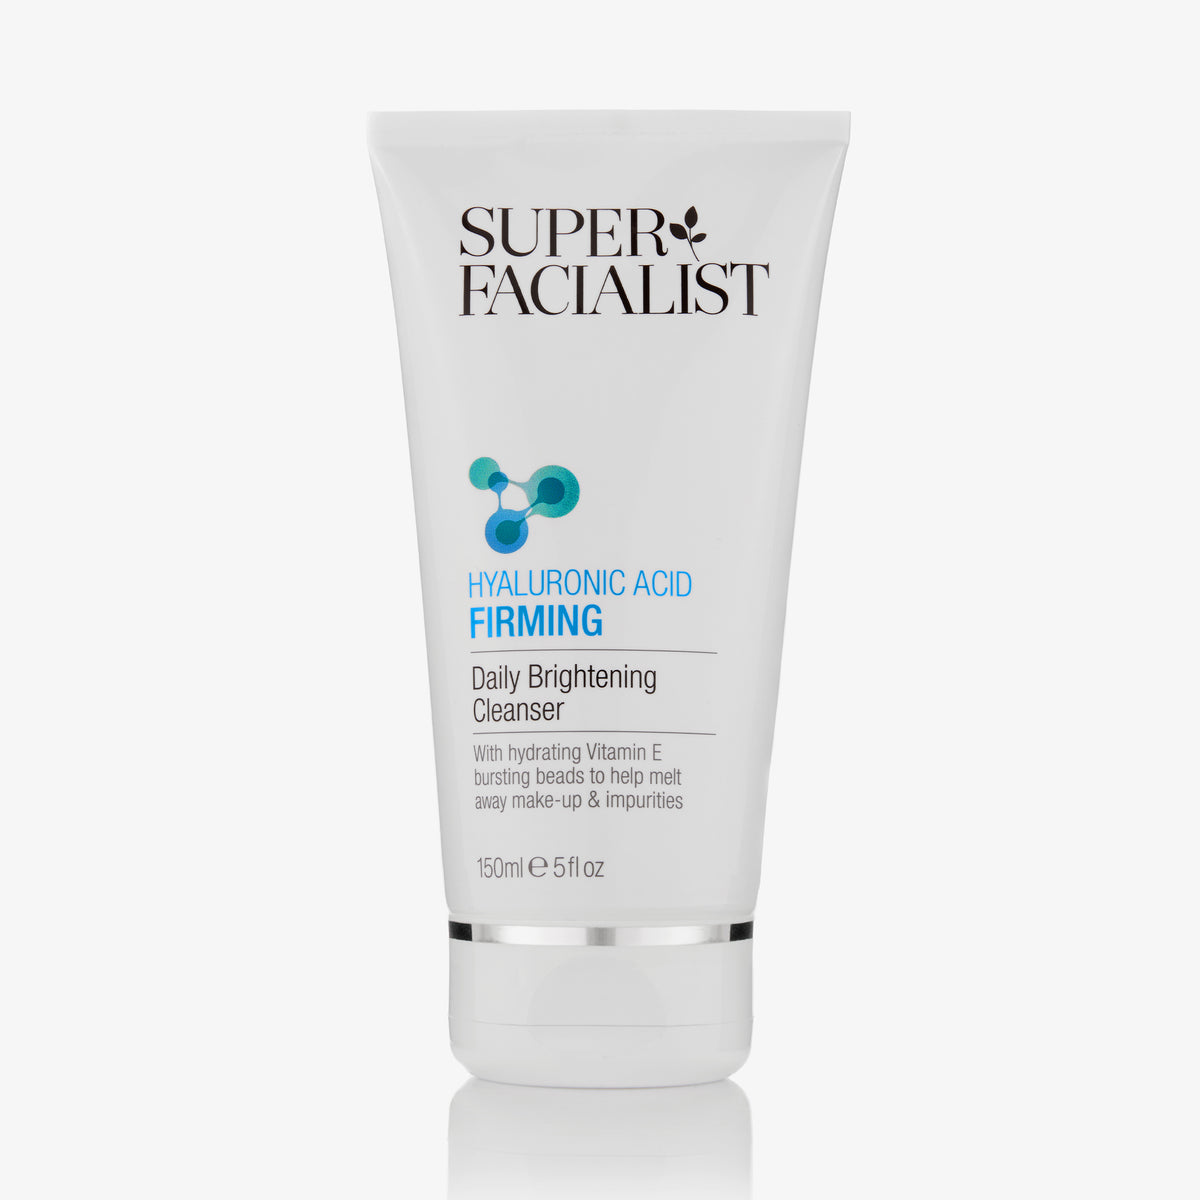 Super Facialist | Hyaluronic Acid Firming Daily Brightening Cleanser